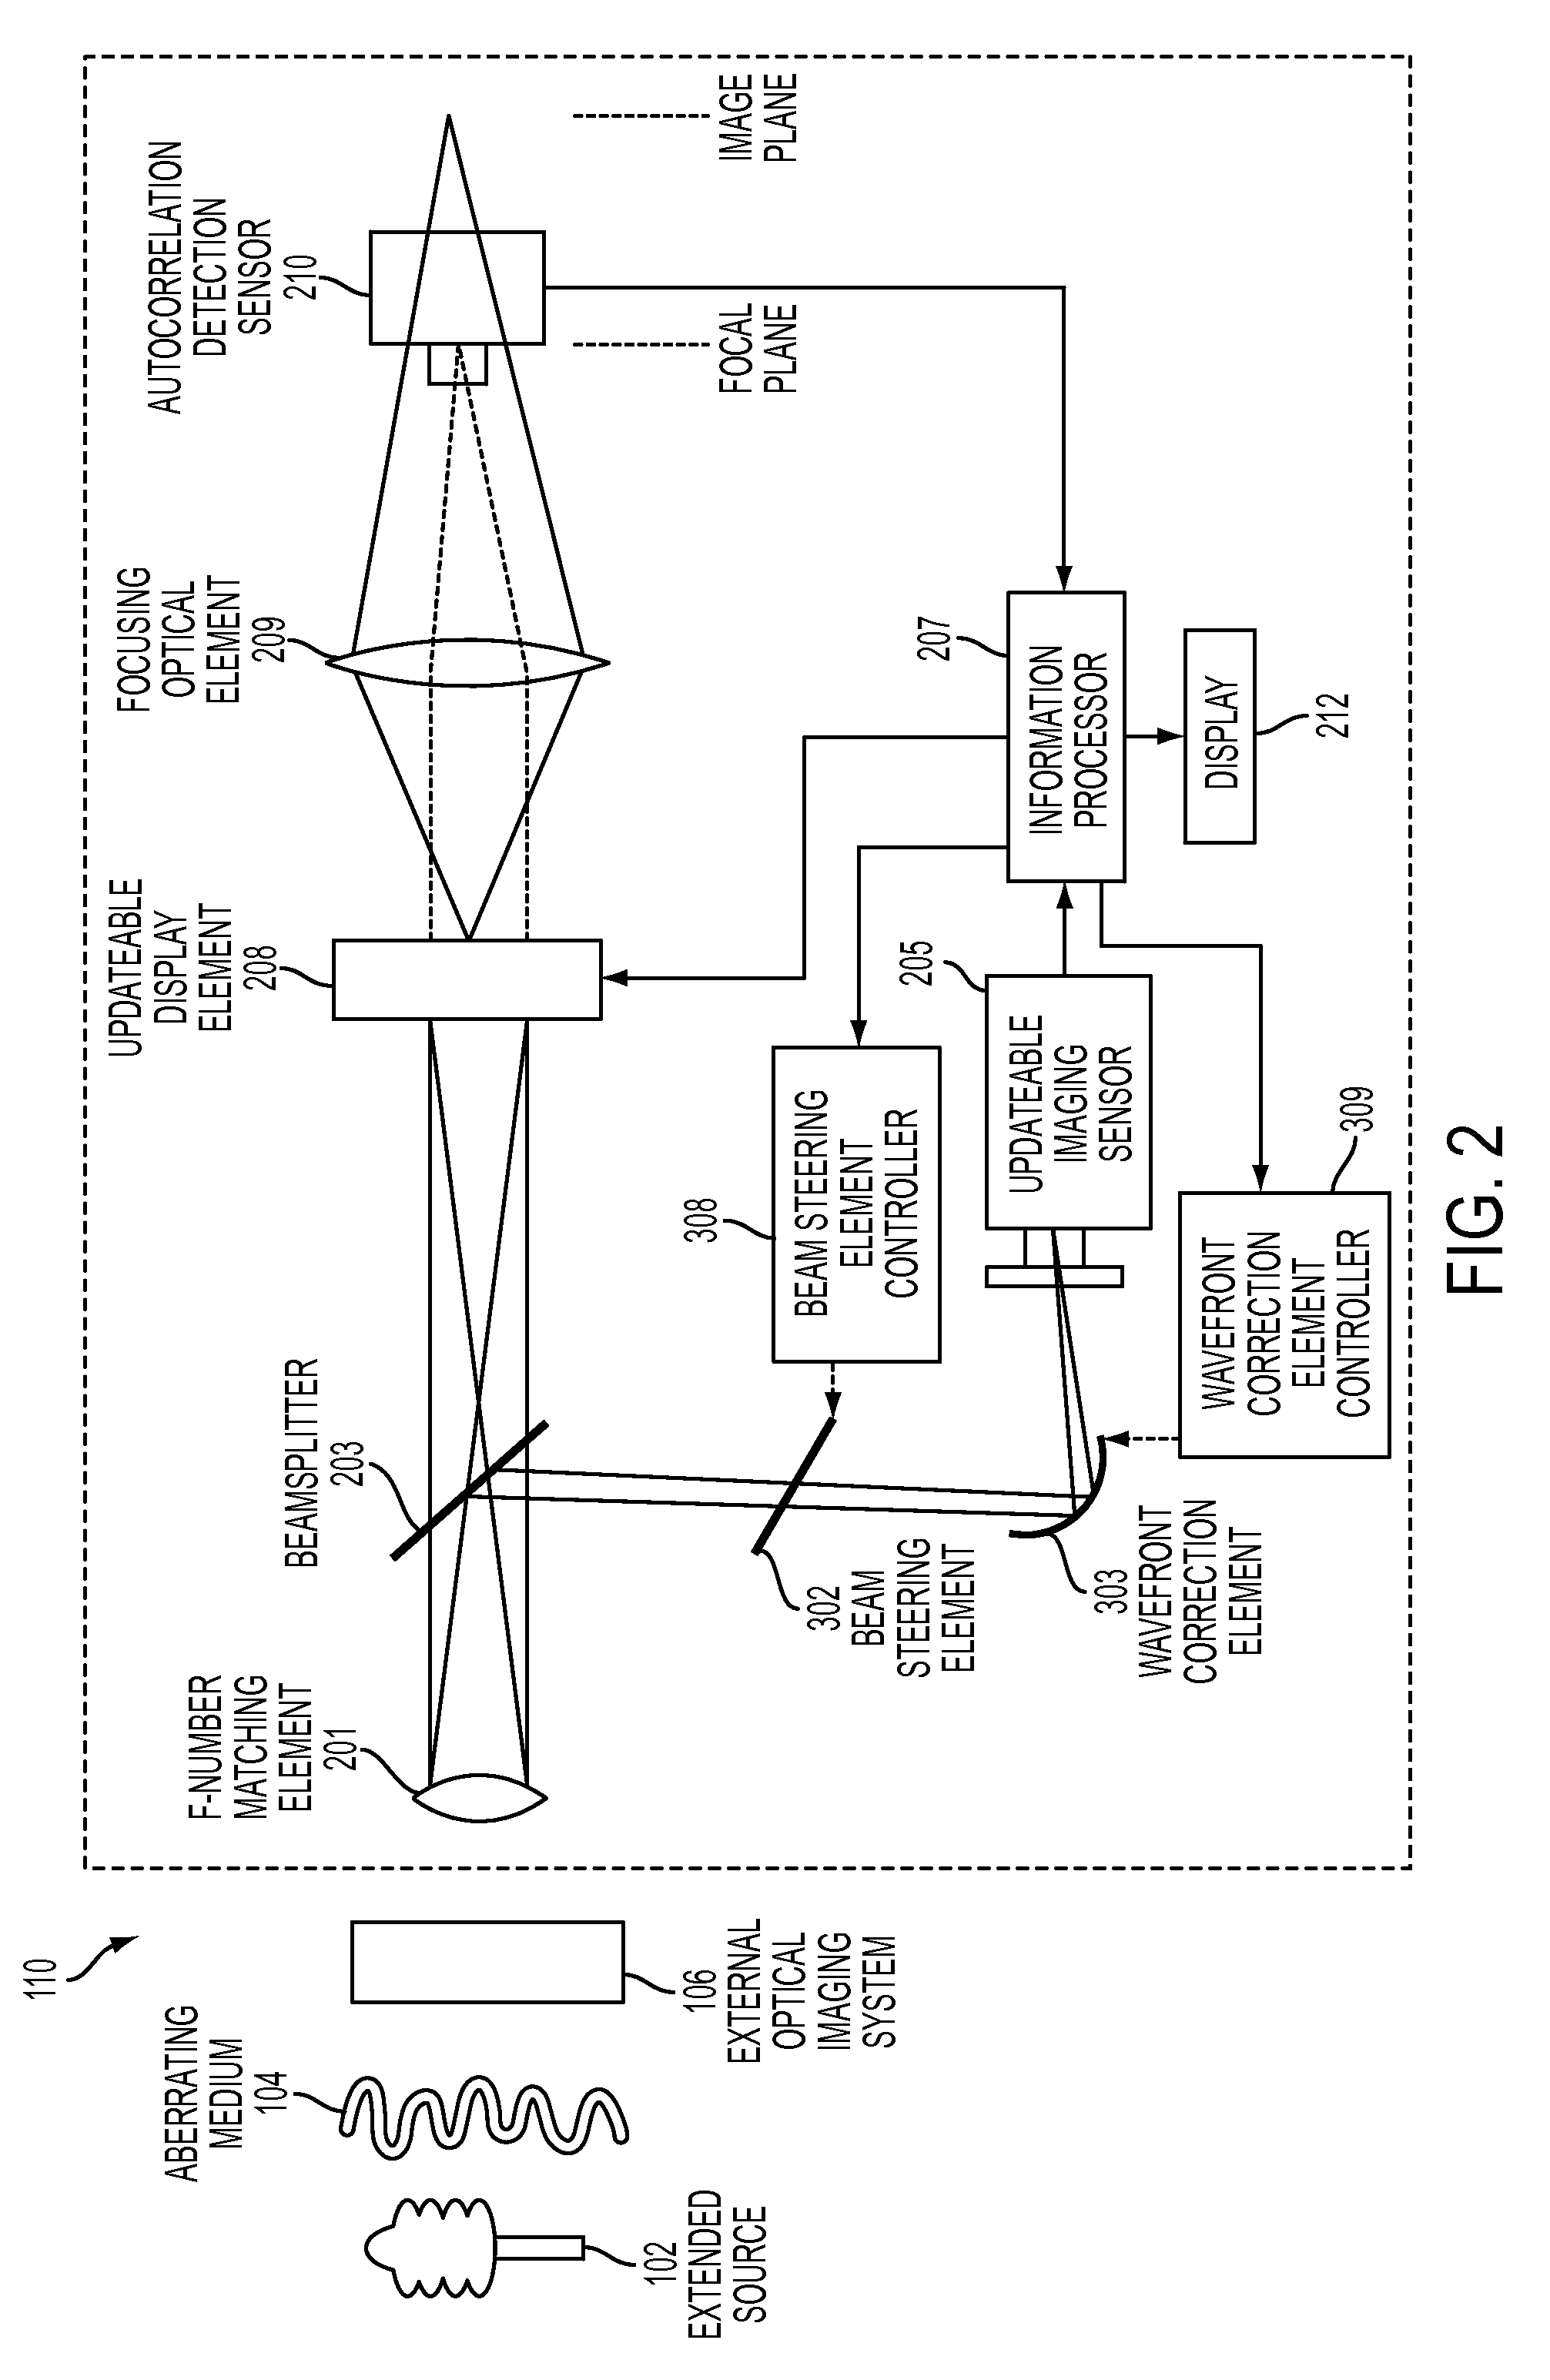 Extended source wavefront sensor through optical correlation with a change in centroid position of light corresponding to a magnitude of tip/tilt aberration of optical jitter